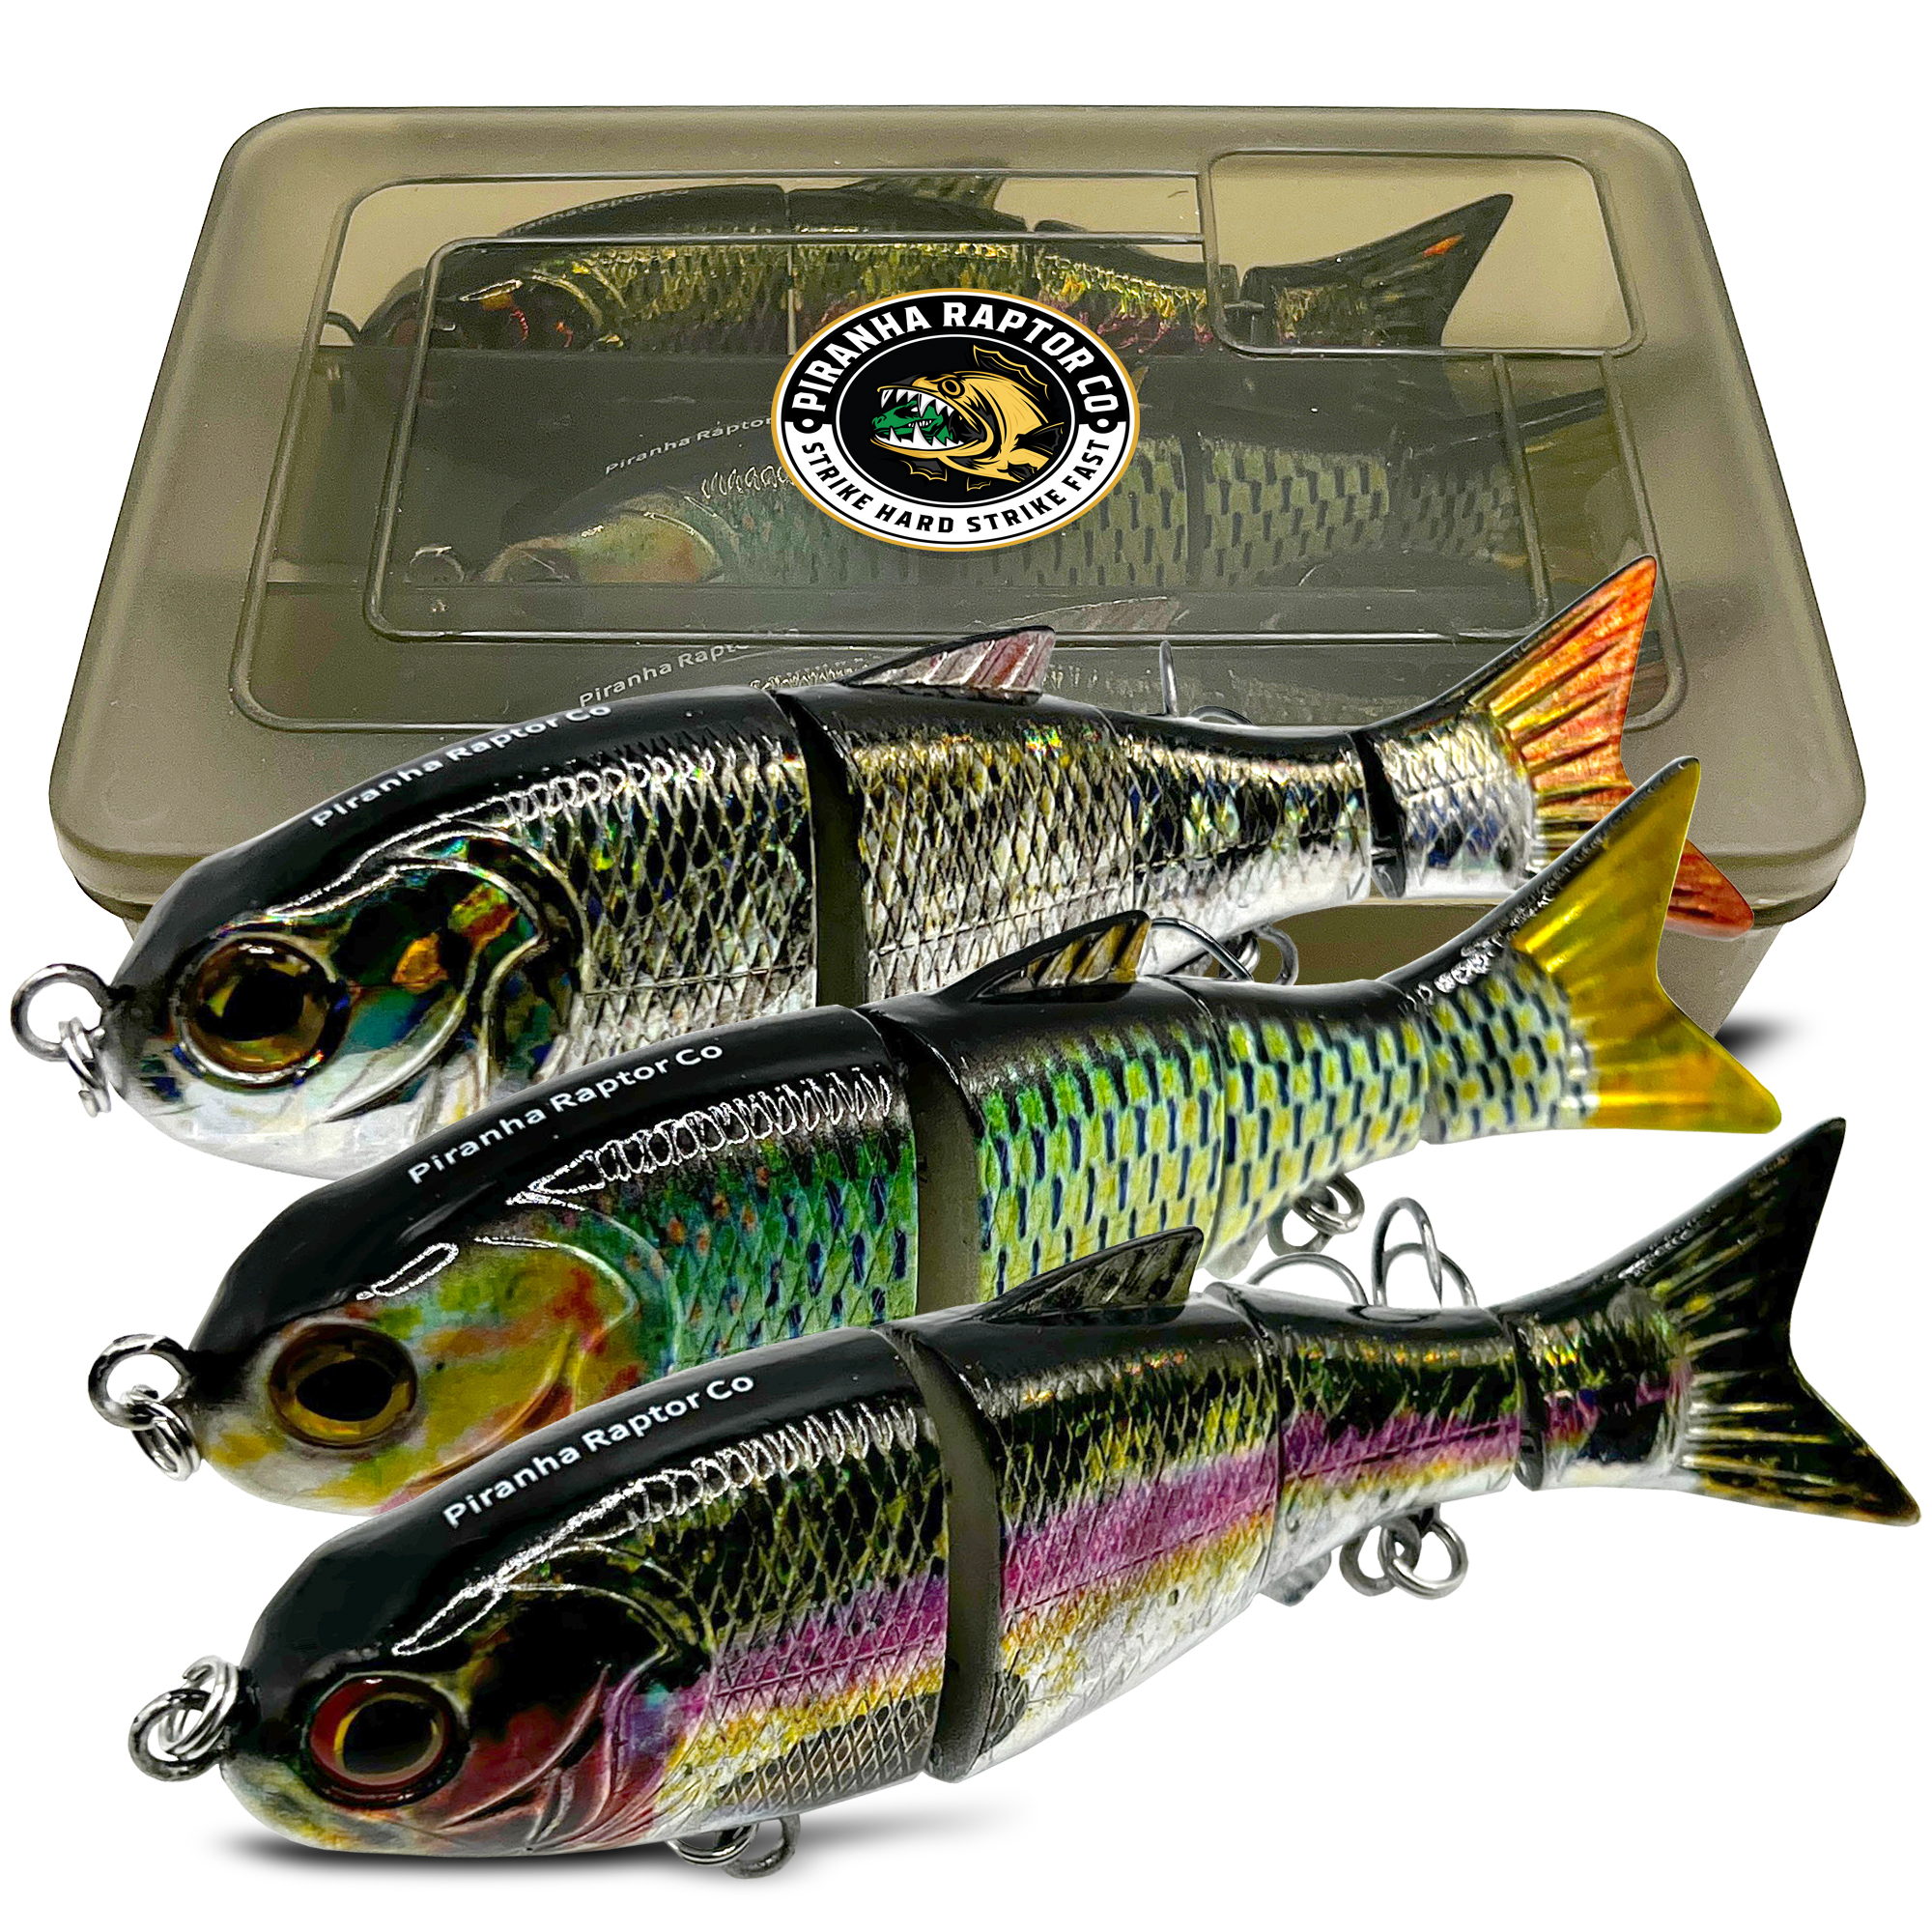 Fishing Lures for Freshwater,Fishing Lure for Bass,Trout,Walleye